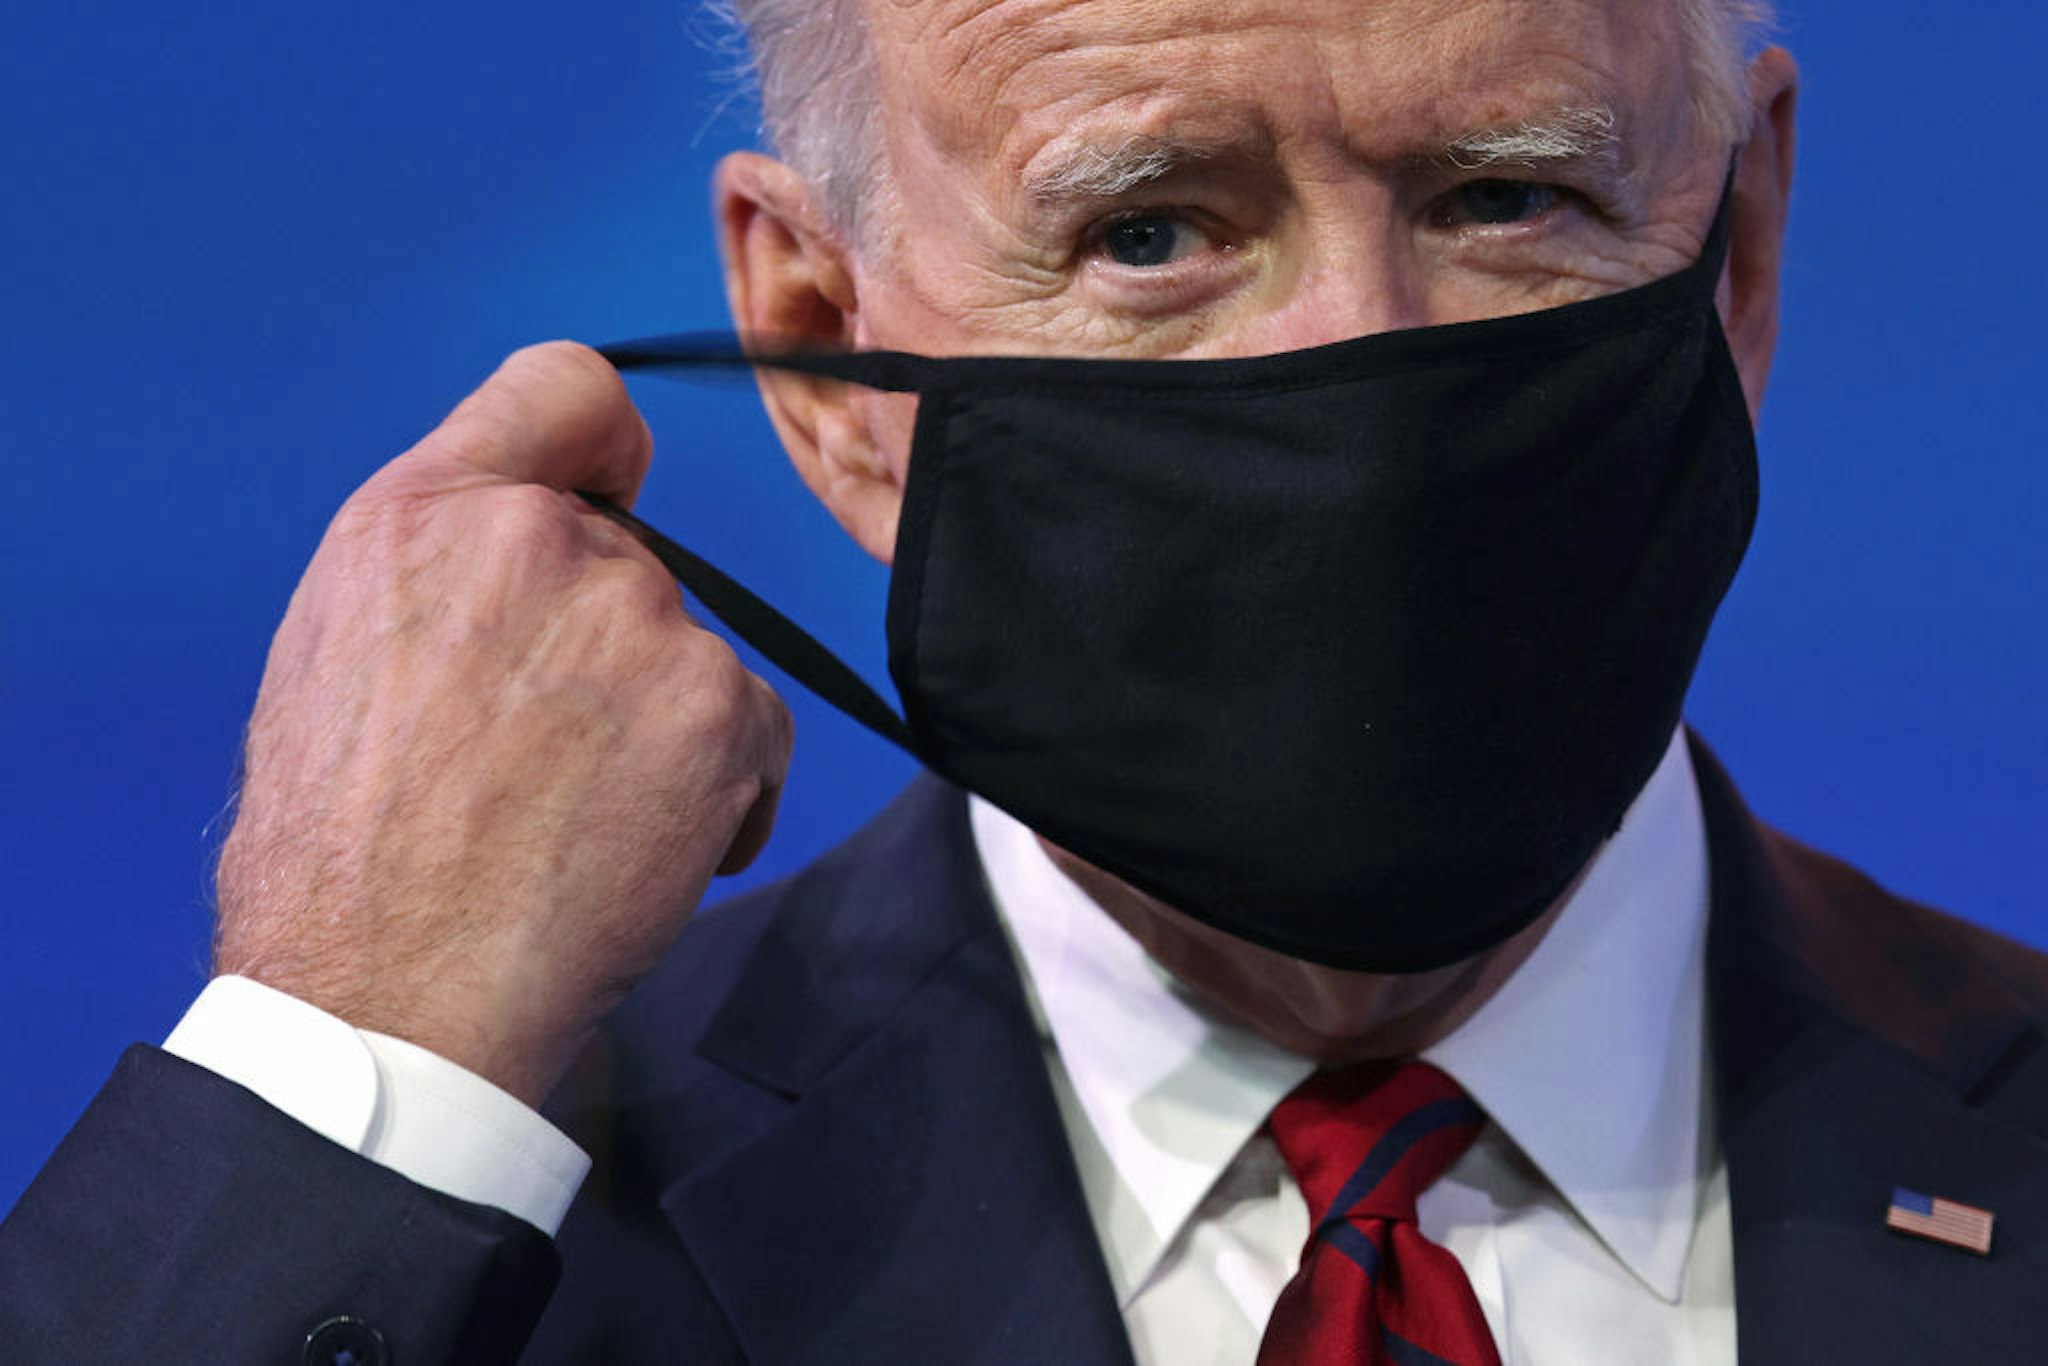 U.S. President-elect Joe Biden takes off his mask as he arrives at the Queen theater to lay out his plan on combating the coronavirus January 15, 2021 in Wilmington, Delaware.